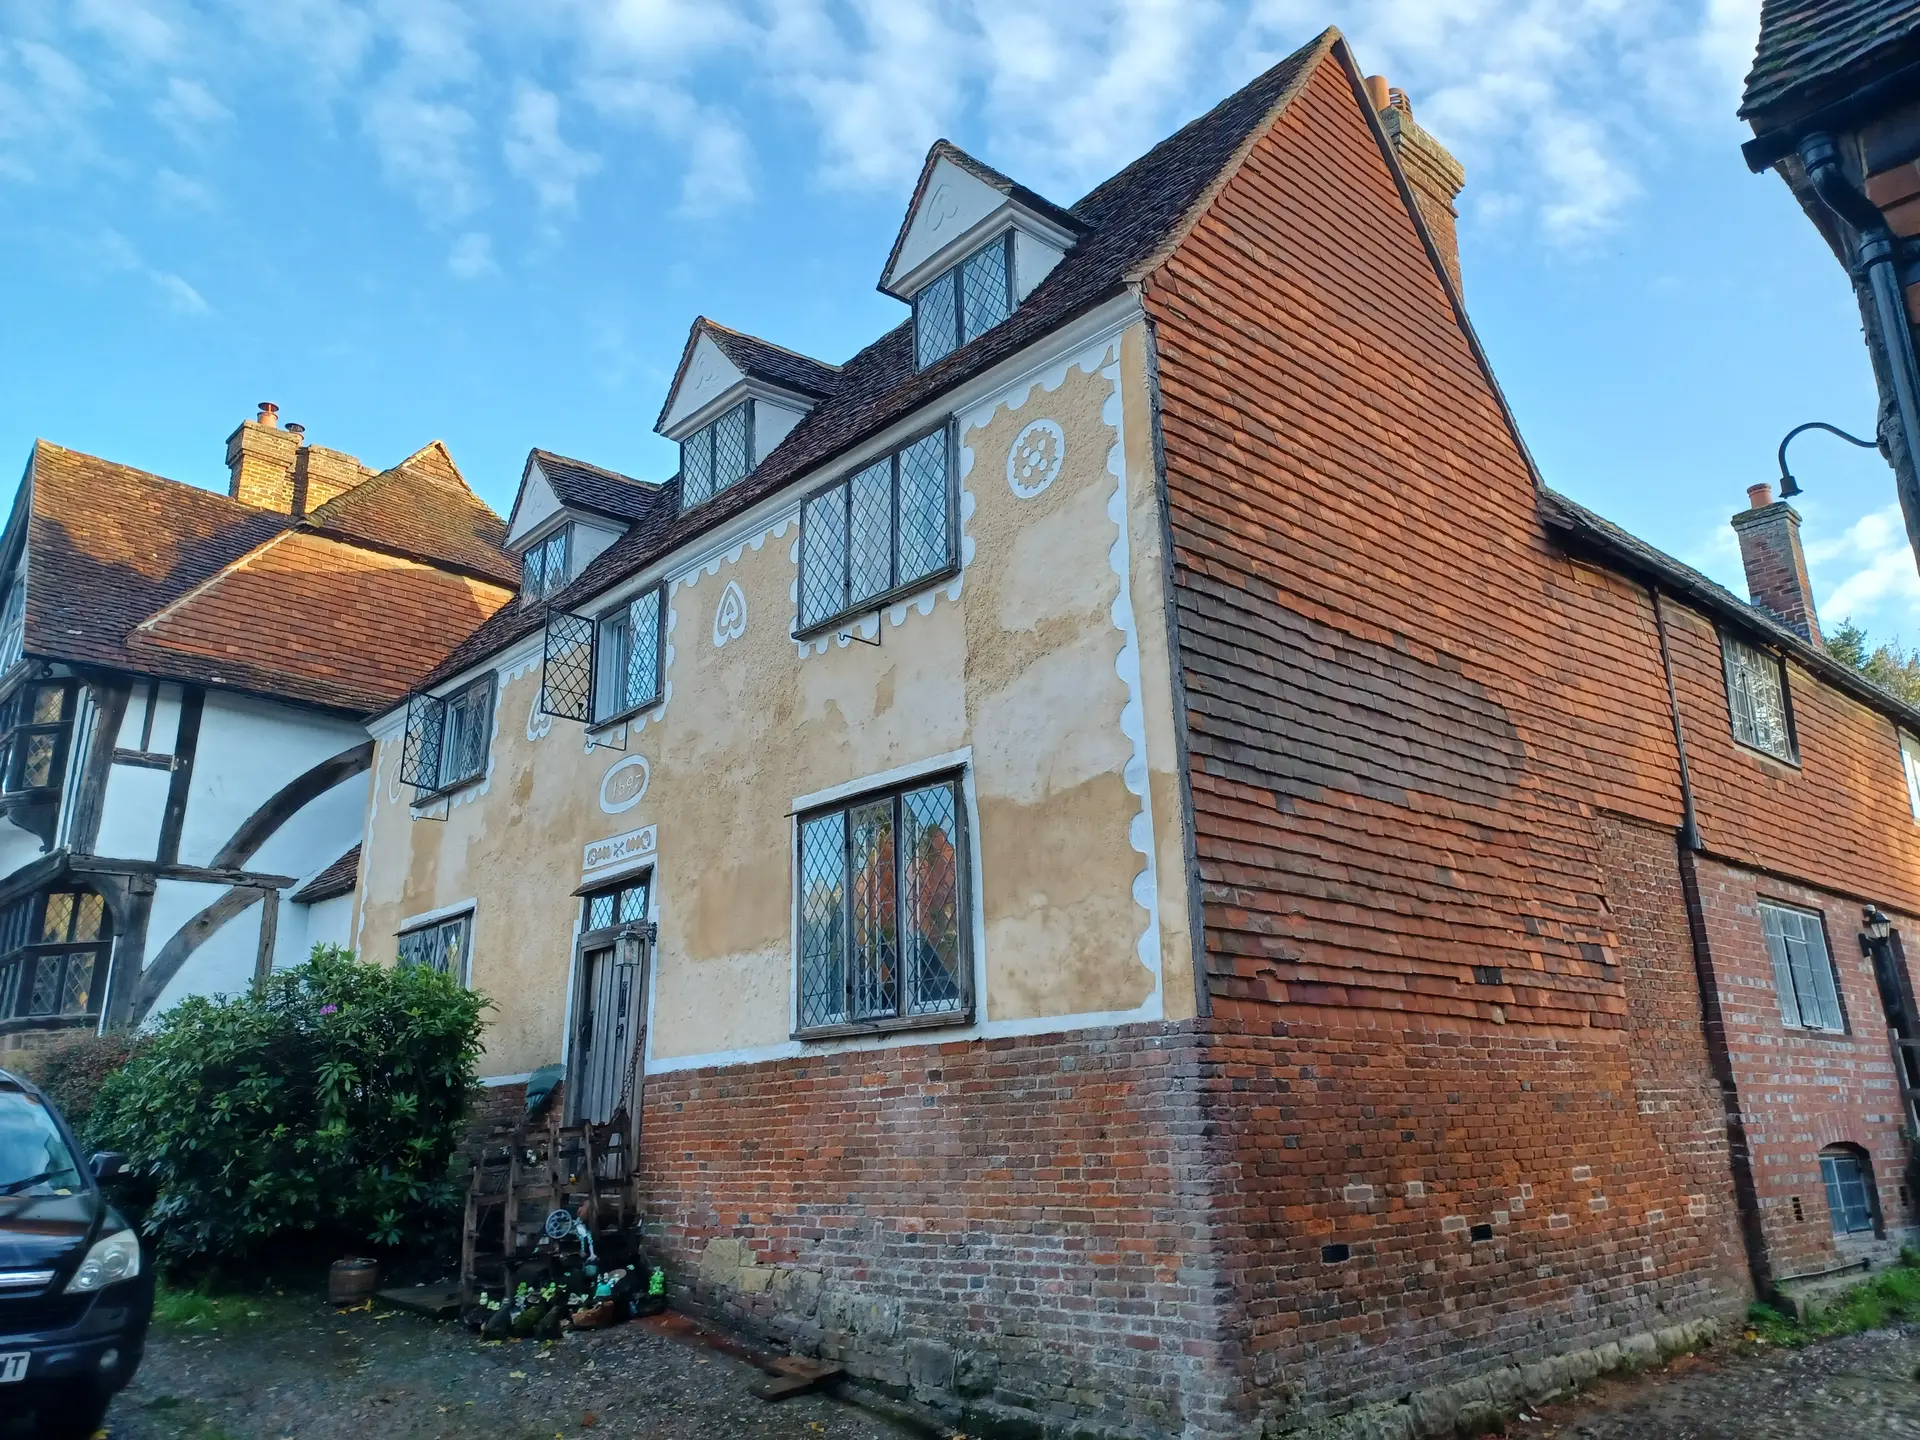 Pargeting at Chiddingstone Village - 'The Gingerbread House'